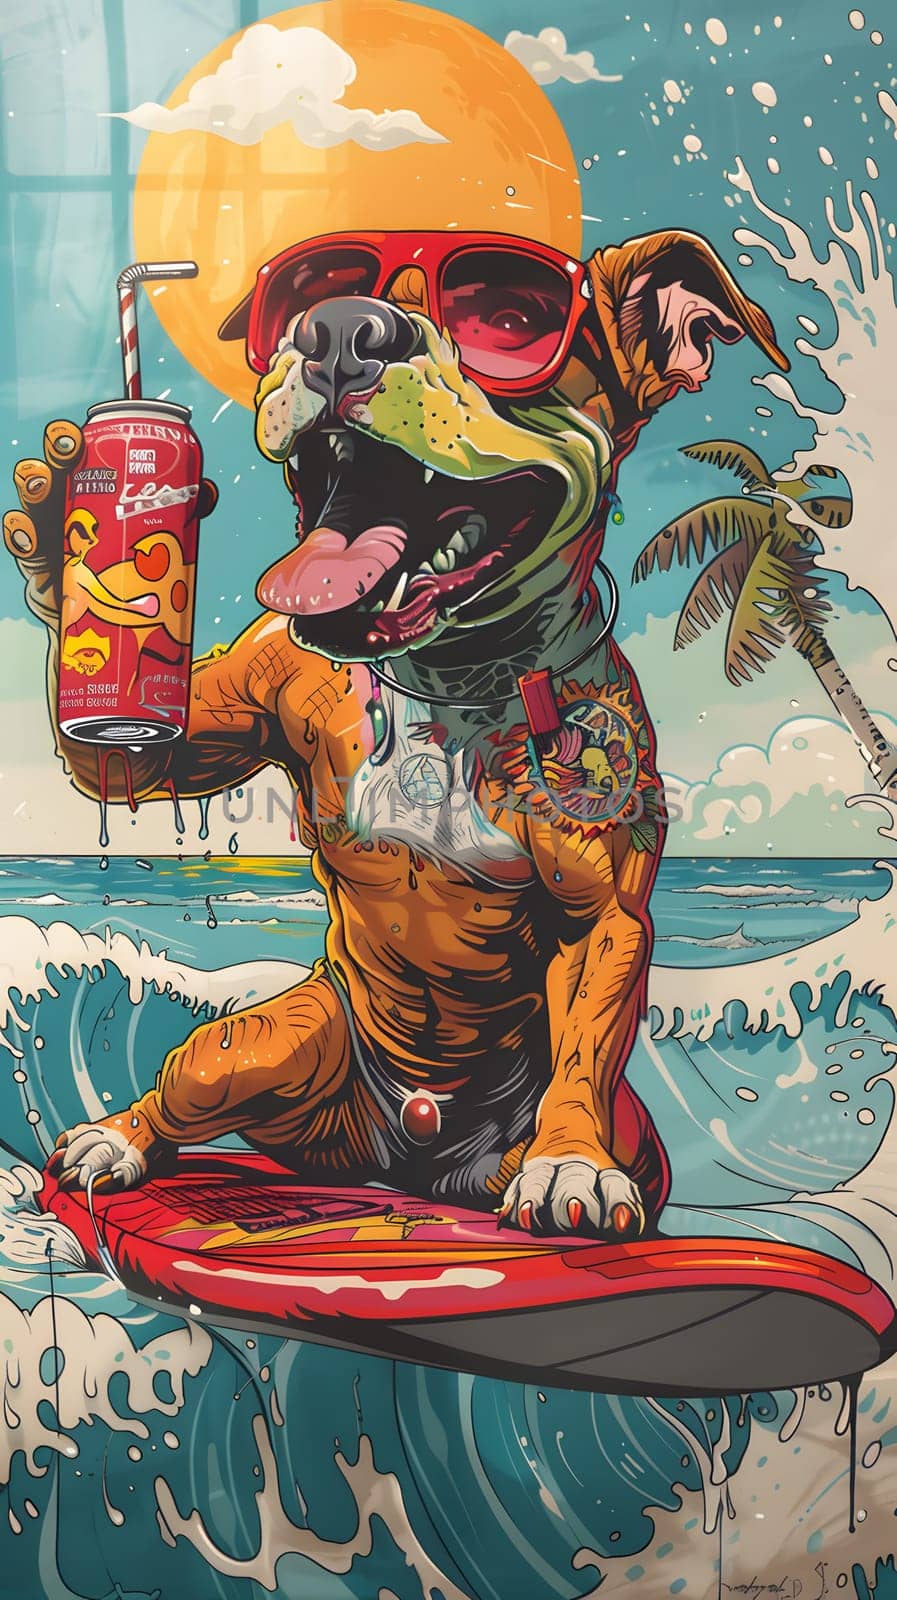 Illustration of a fictional dog on a surfboard with a coca cola can by Nadtochiy